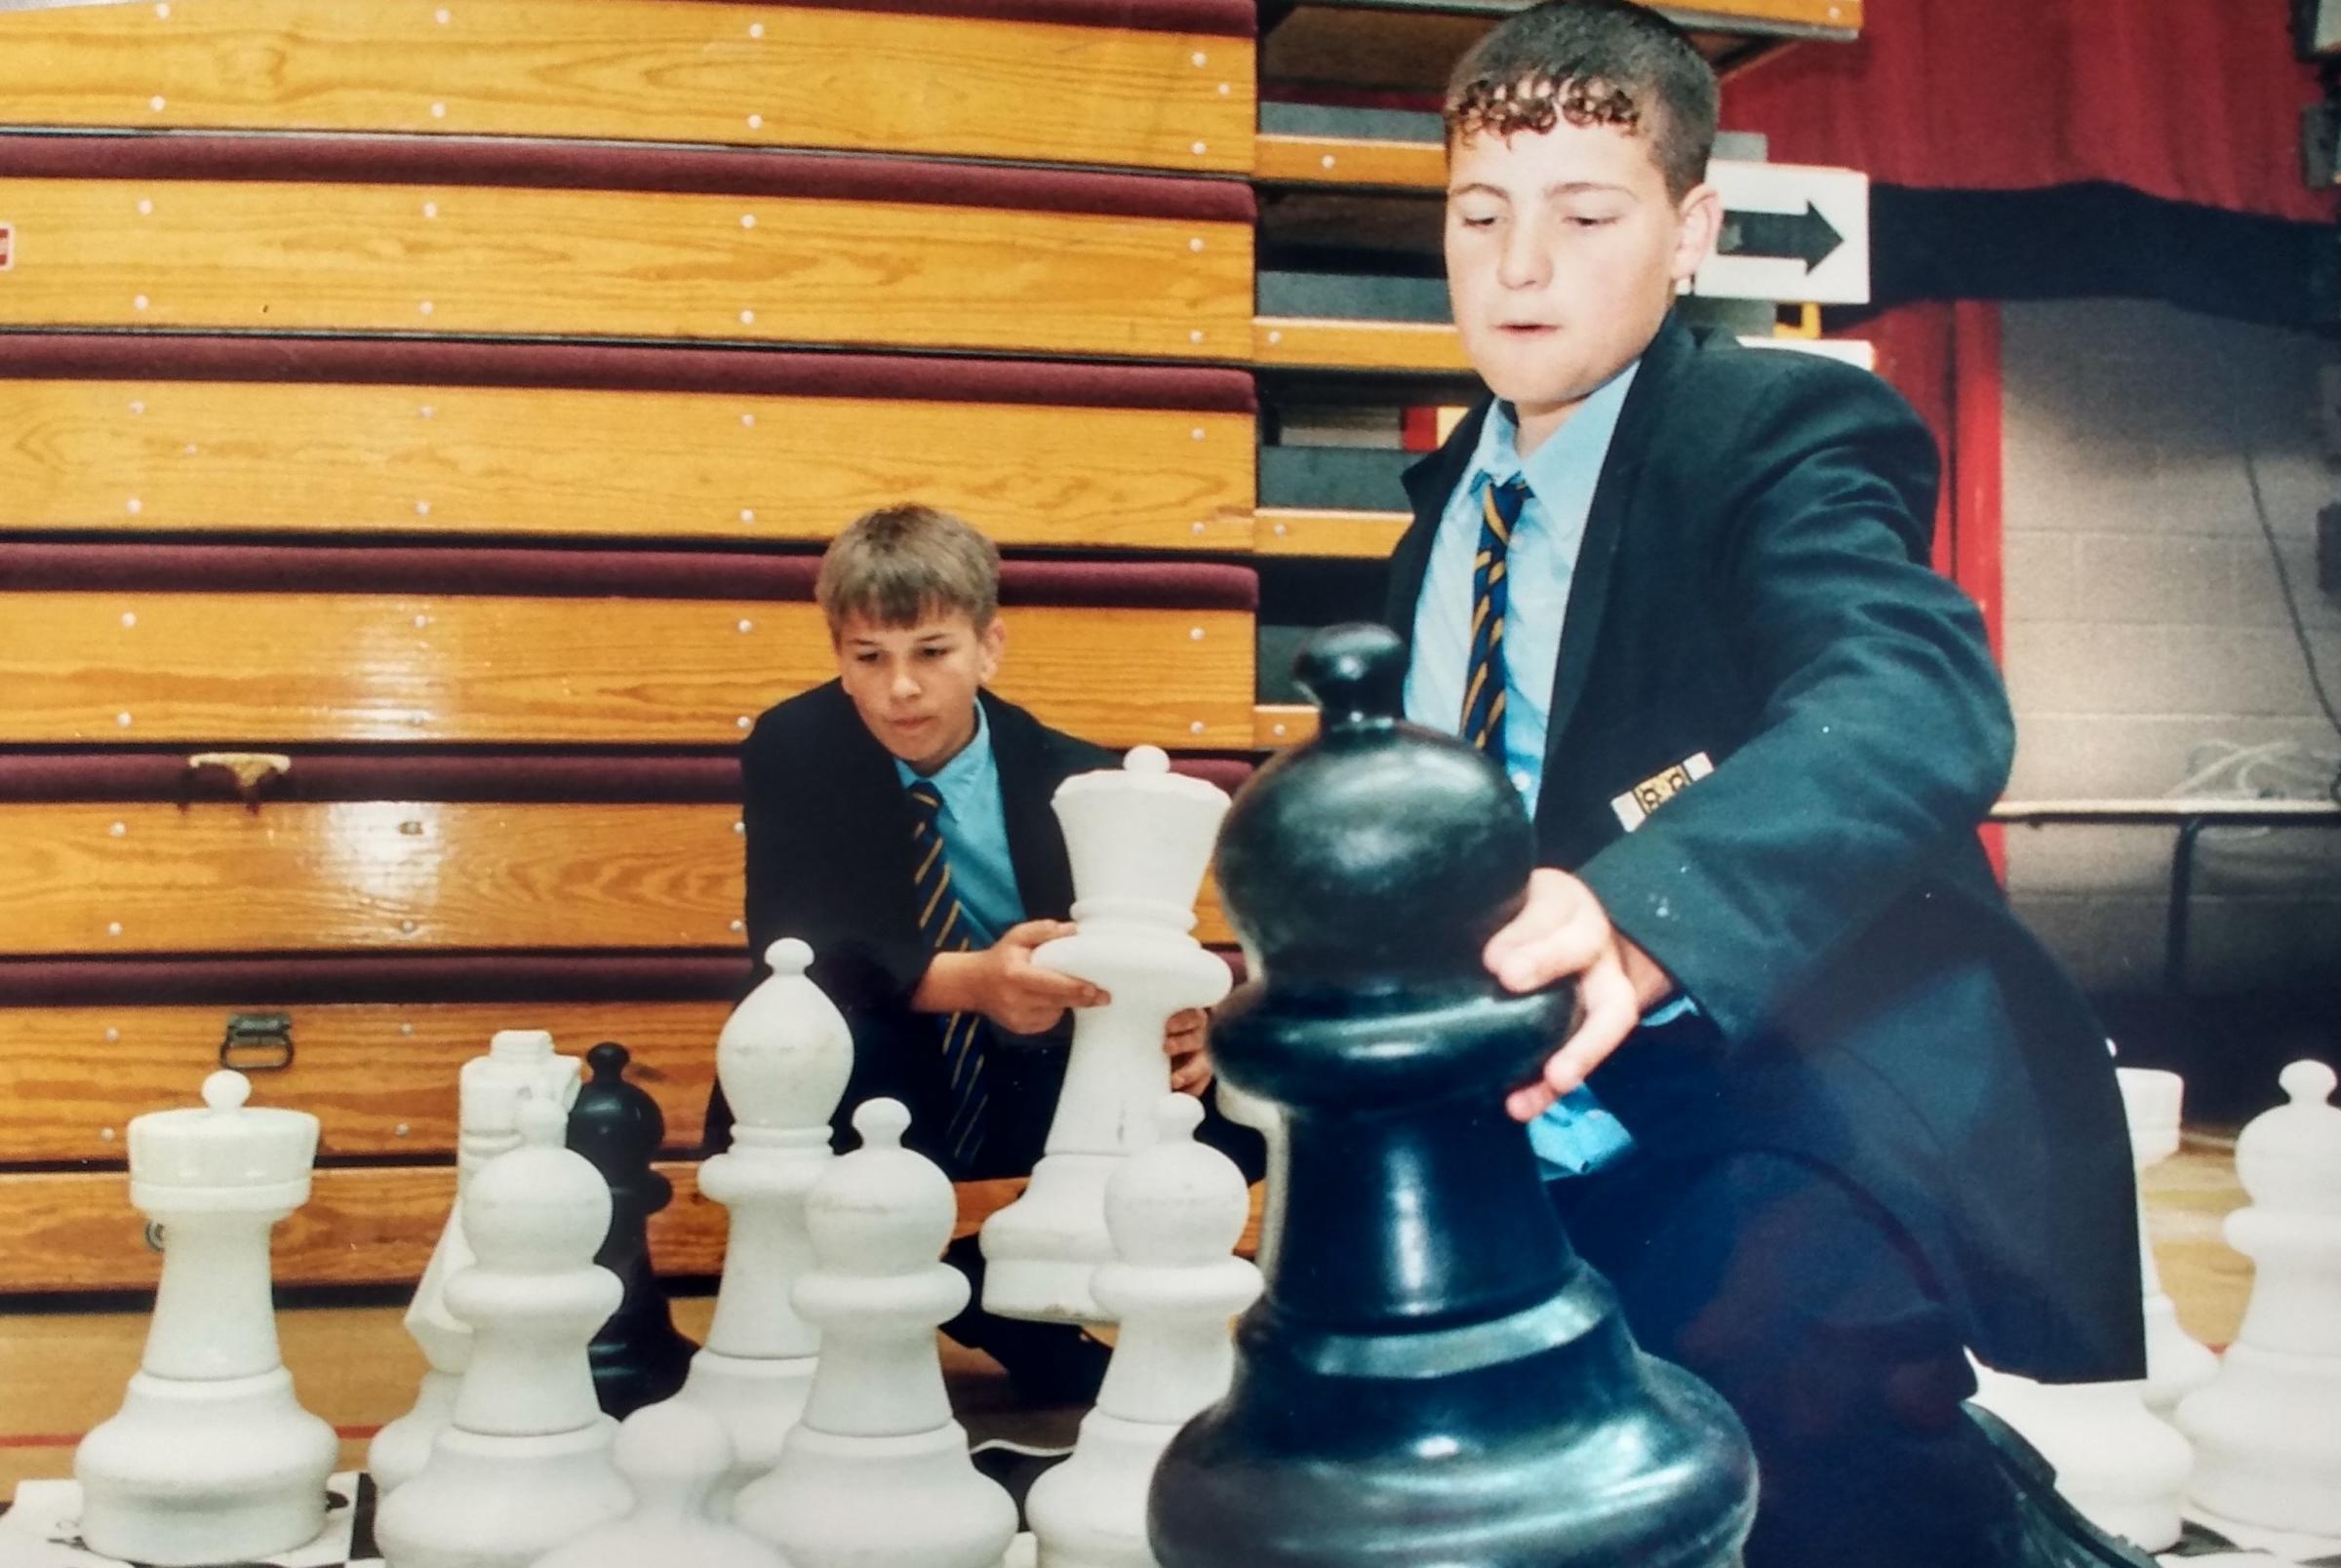 June 1997 and Bishop pupils Andrew Booth and Matt Harris make their move with a giant chess set in an Action For Youth event held at Perdiswell Leisure Centre